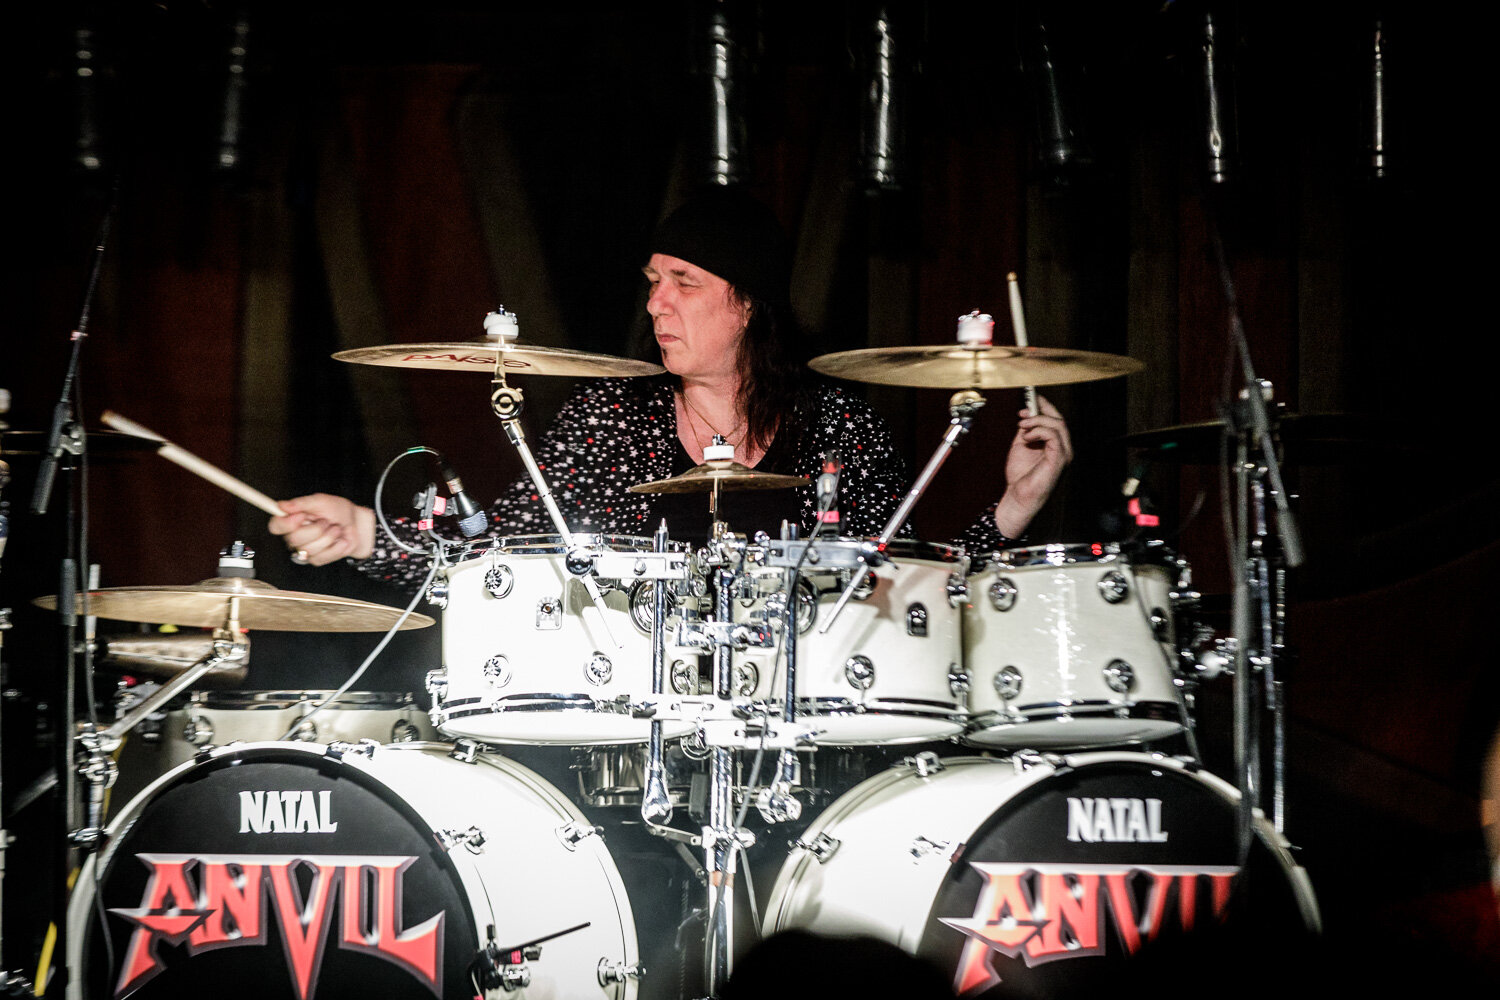 Anvil at the Tivoli in Buckley on March 6th 2020 